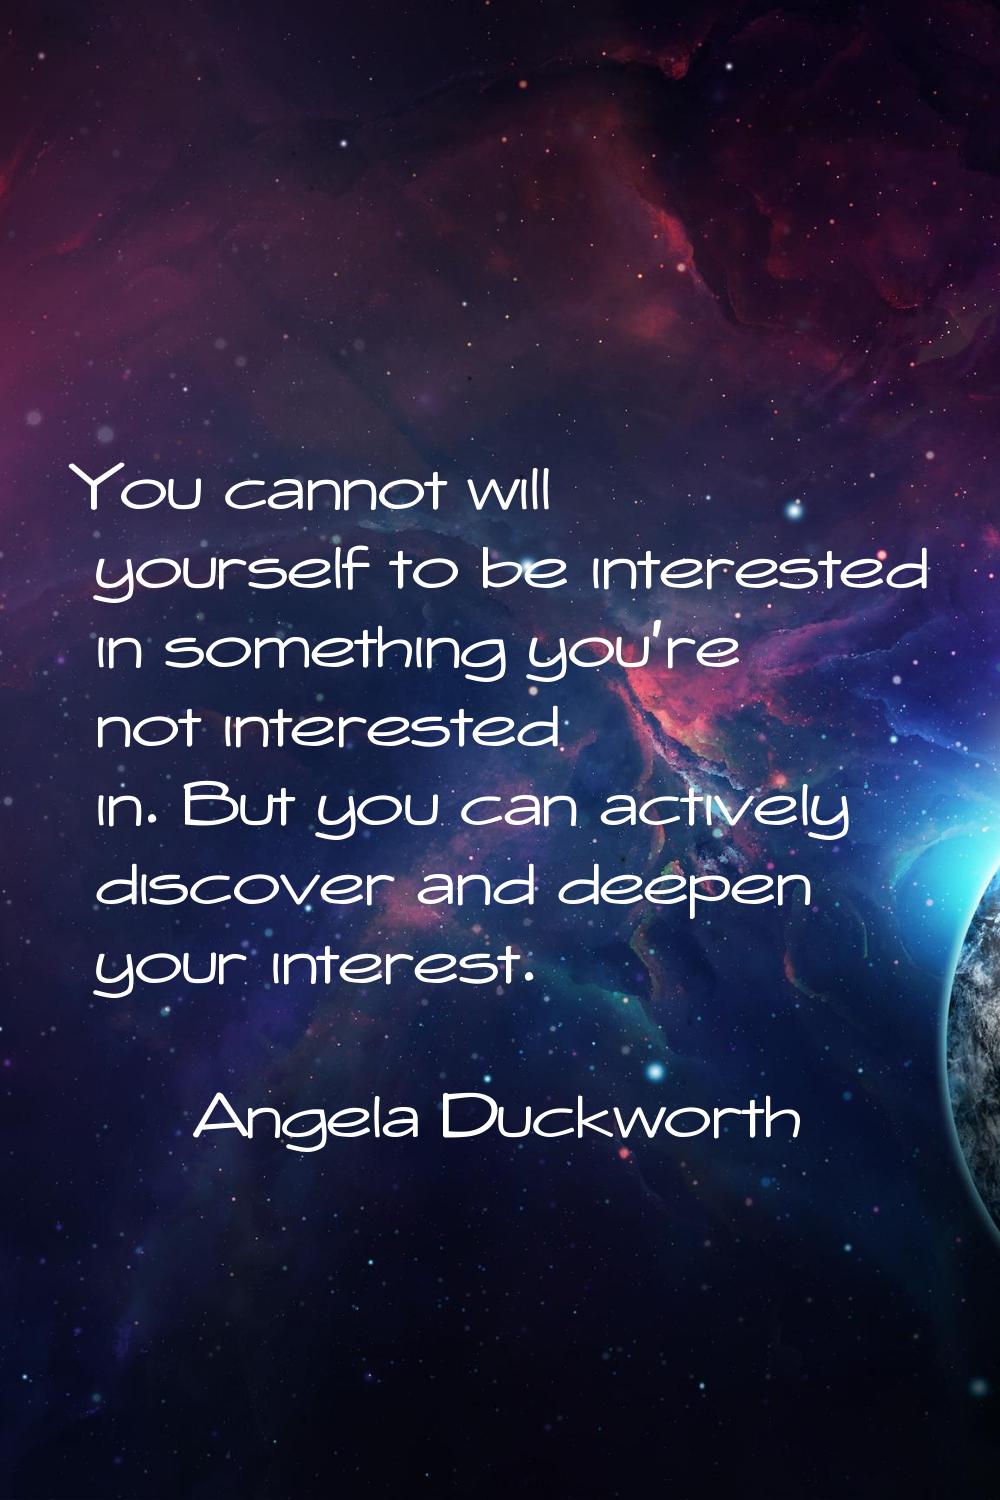 You cannot will yourself to be interested in something you're not interested in. But you can active